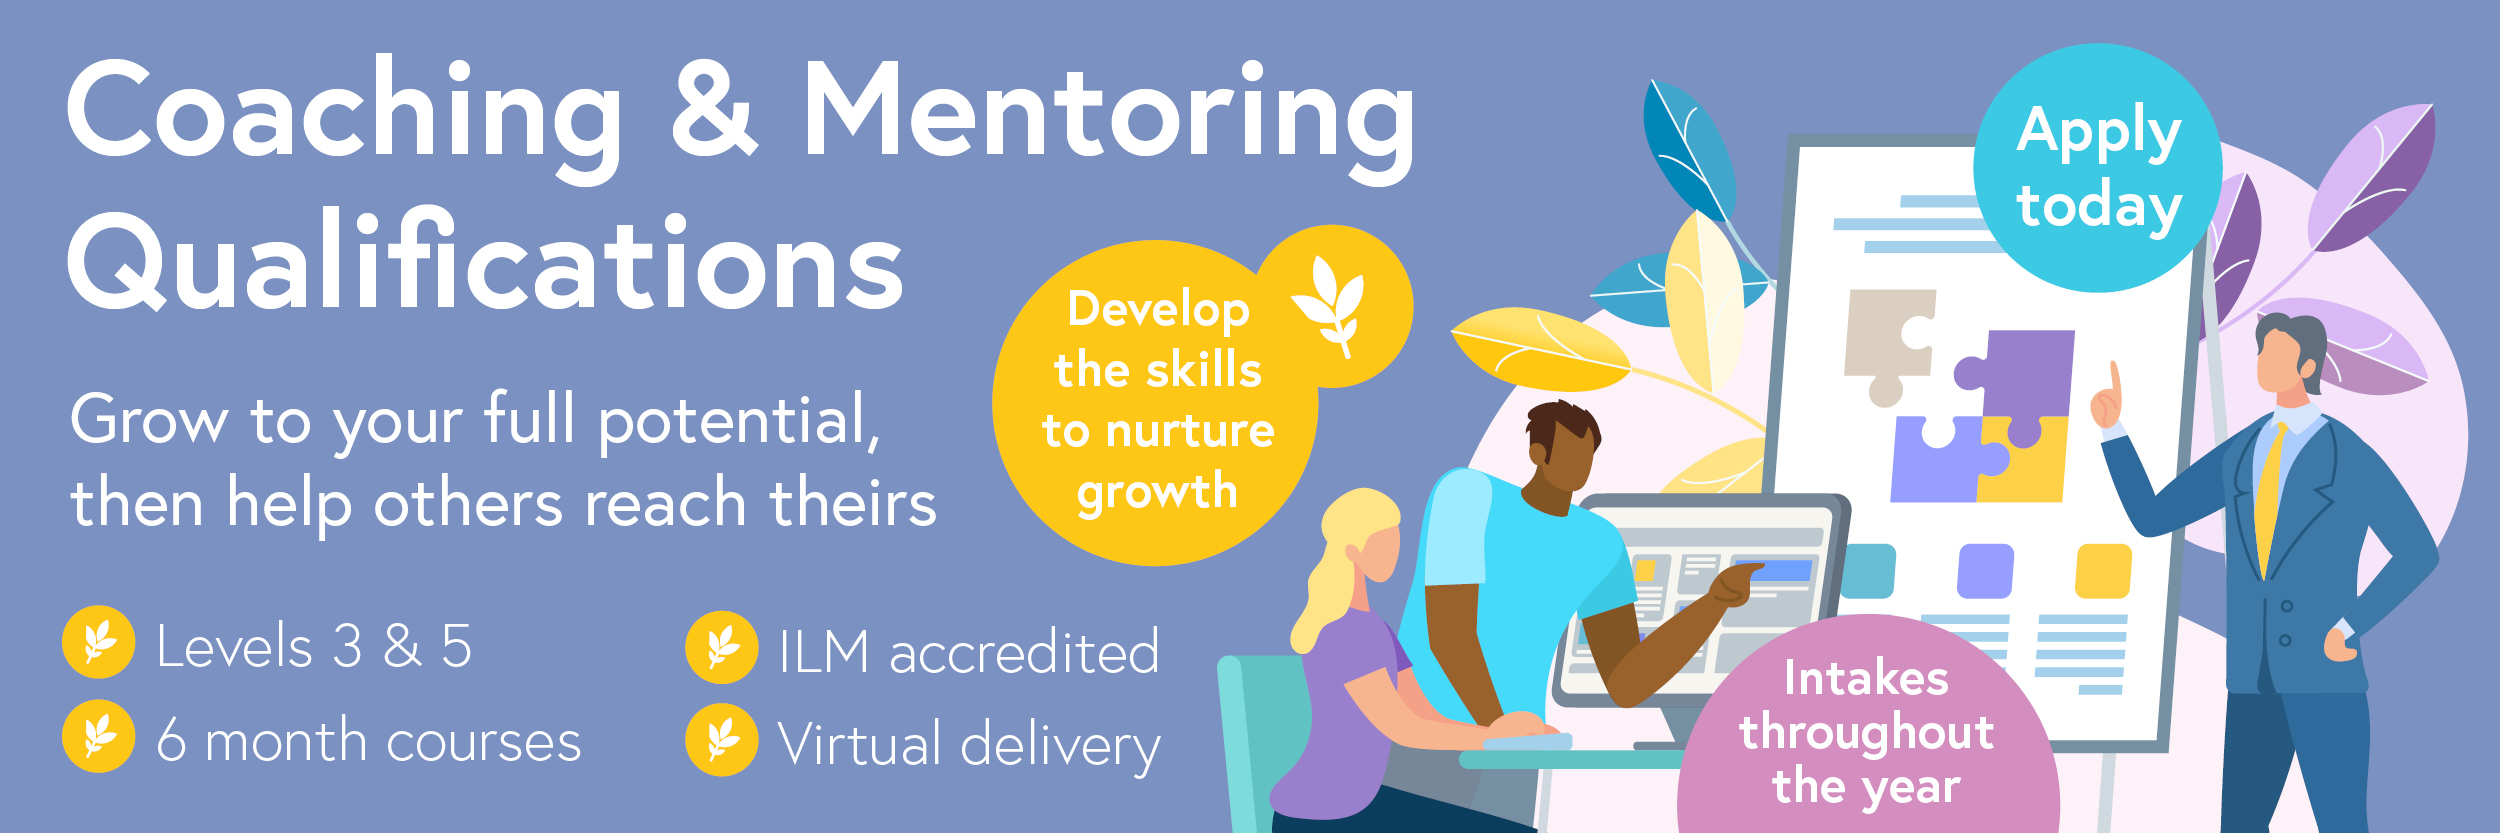 Coaching and Mentoring qualifications